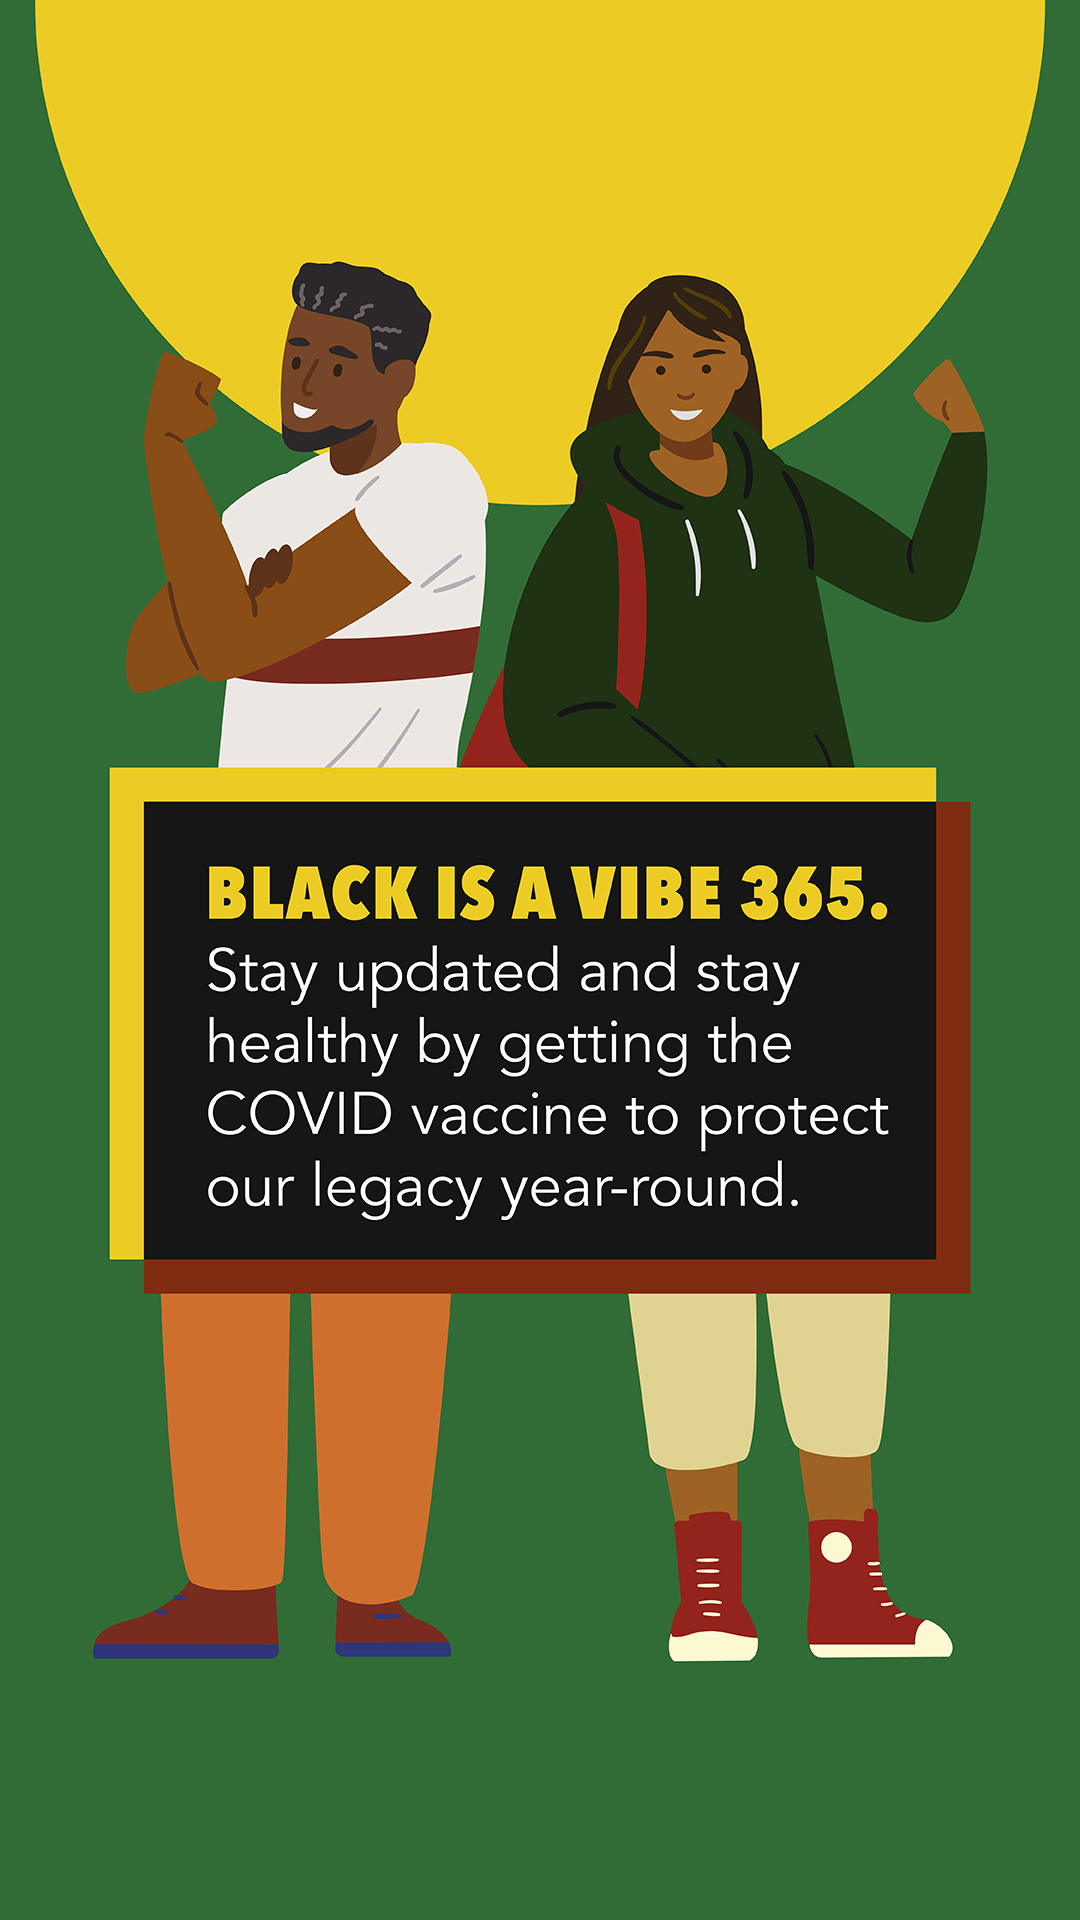 Graphic includes a Black man and a Black women smiling and raising their arms to signify strength. 